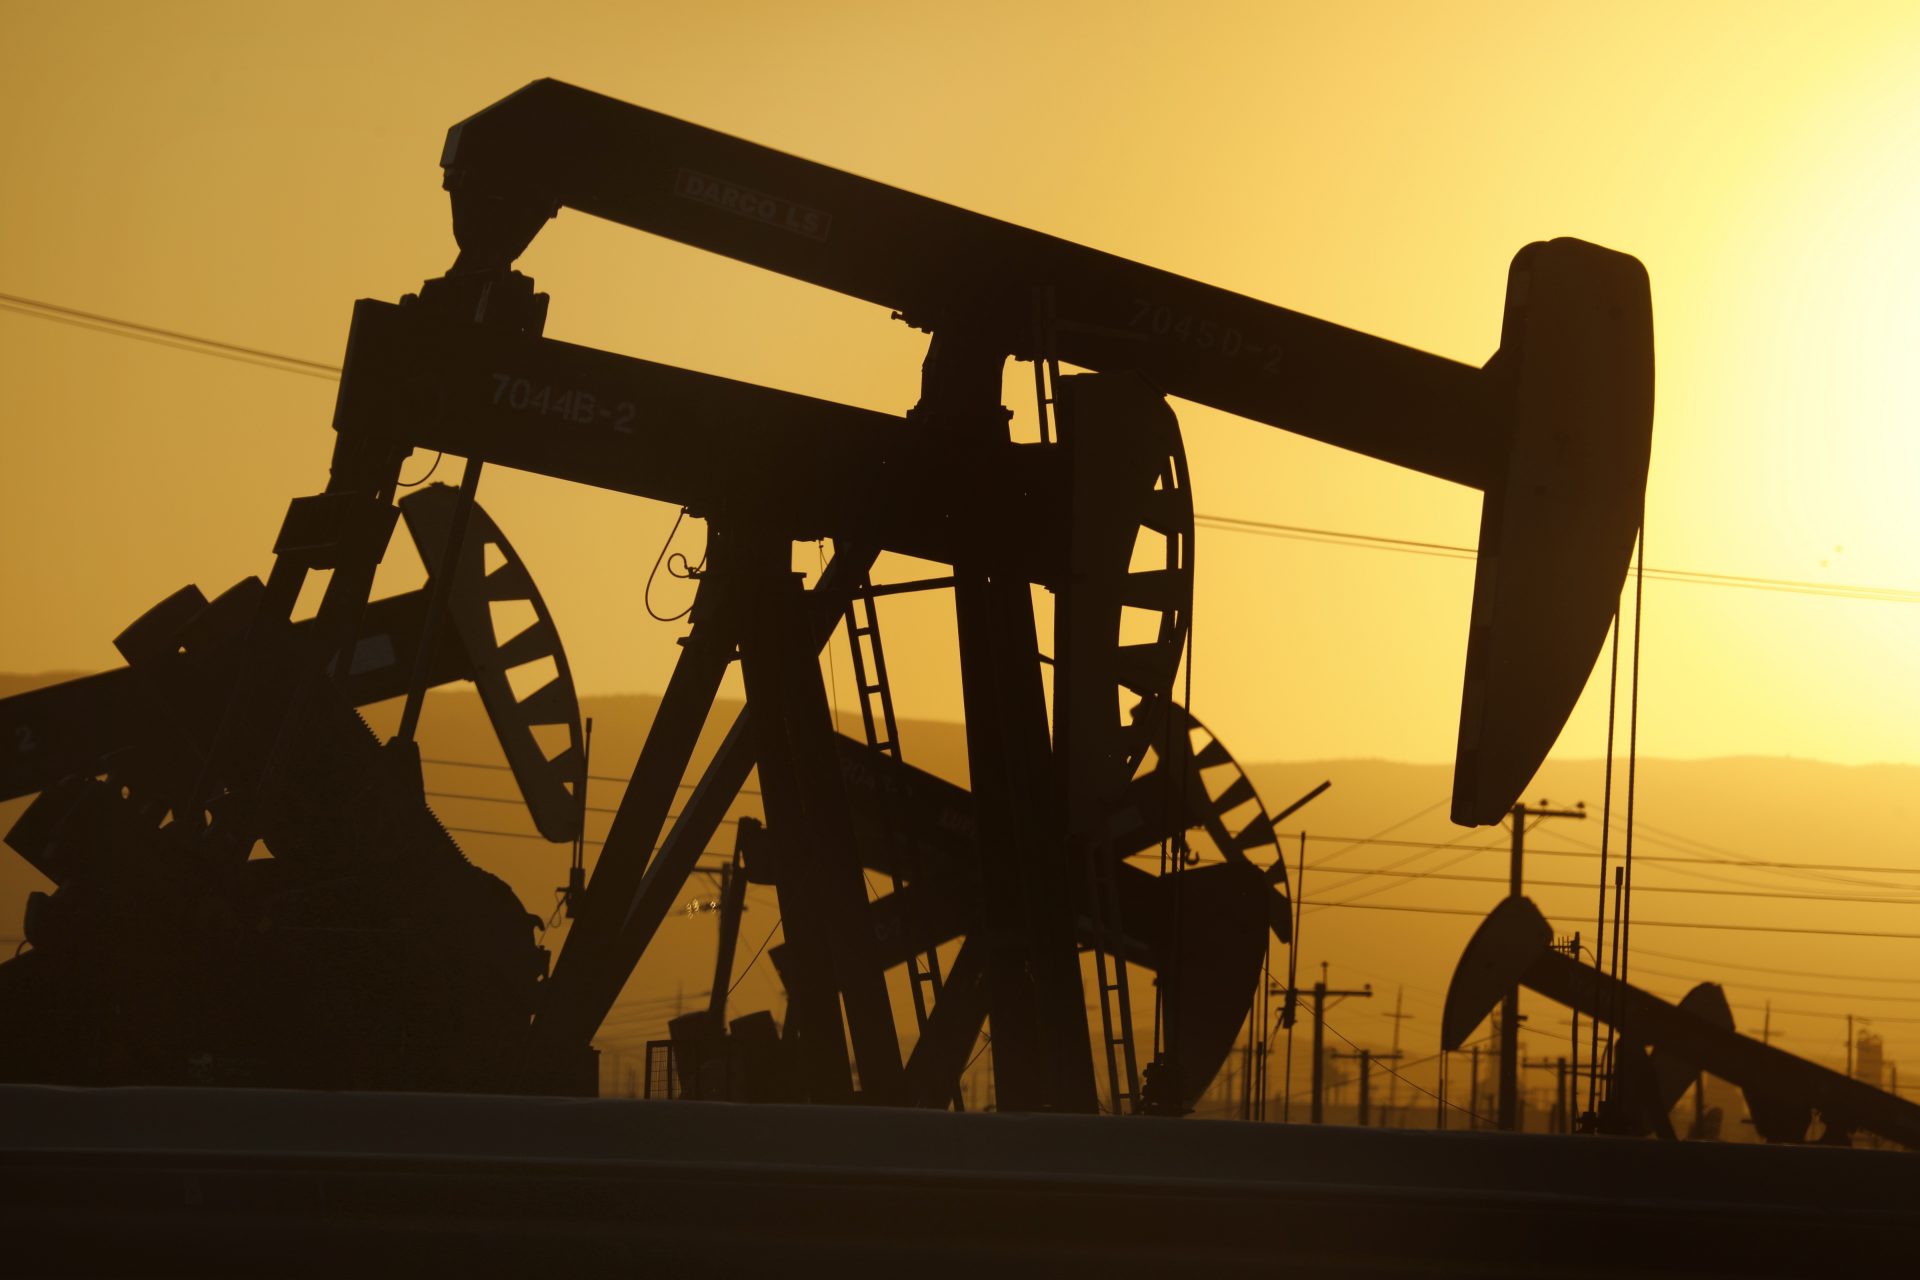 California plans to discontinue oil extraction by 2045